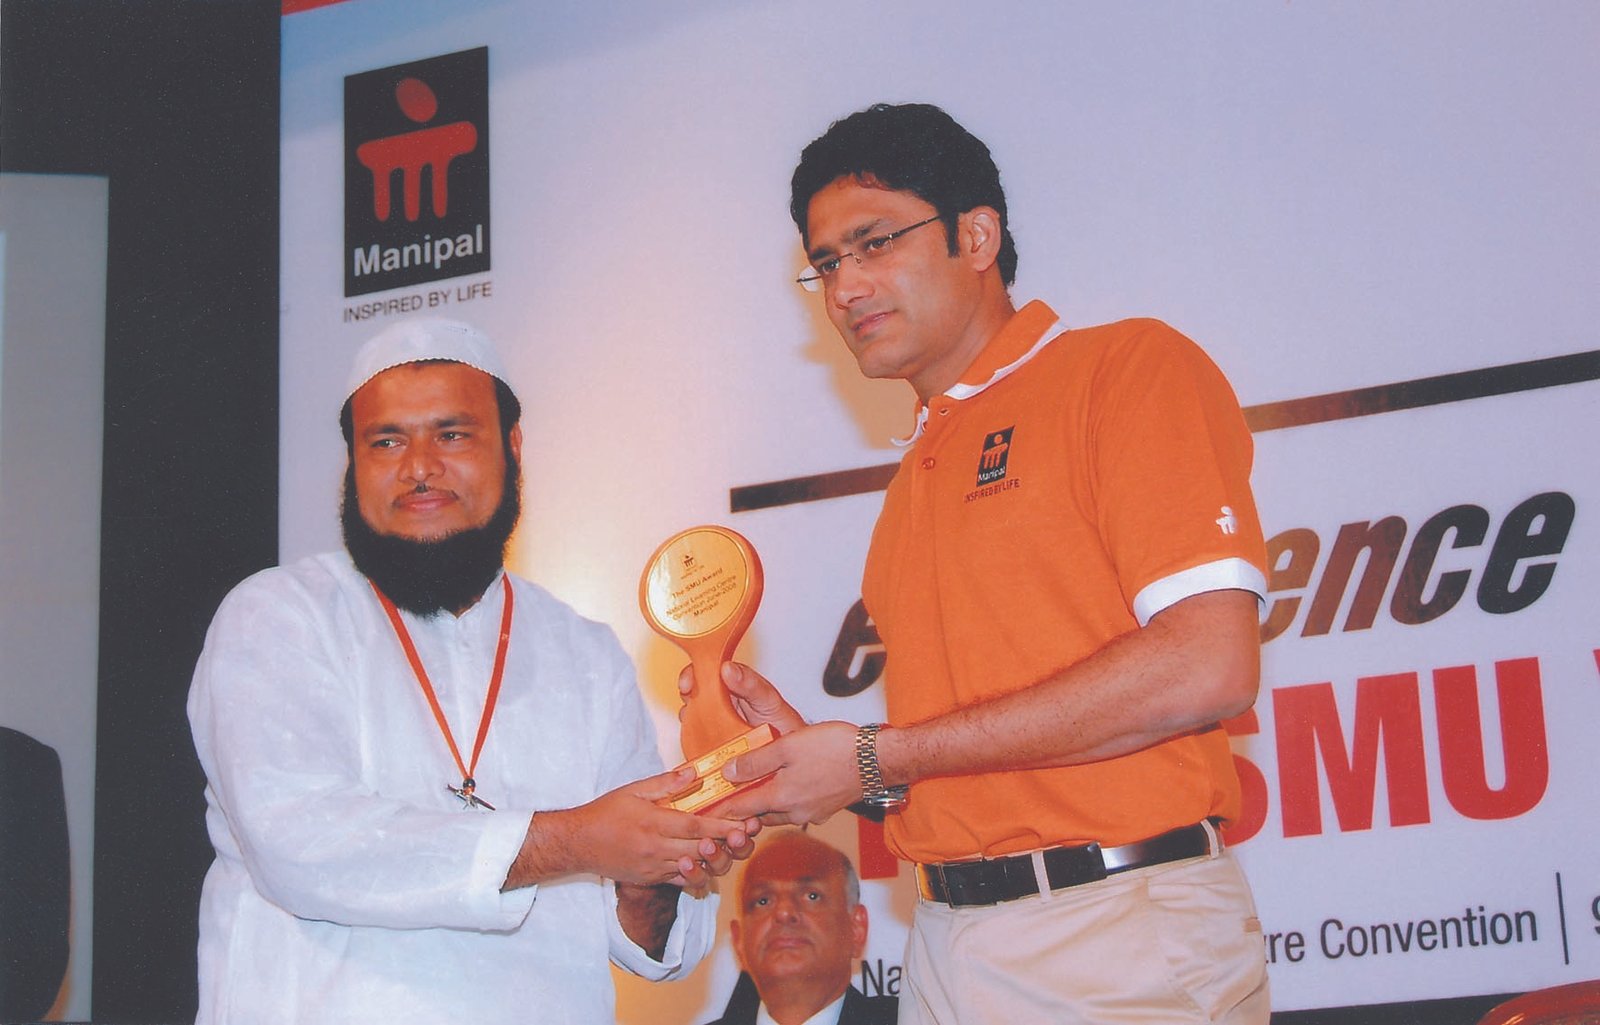 Received SMU Excellence Award when Central IT College was ranked 2nd in all over India for consecutive 6 years.